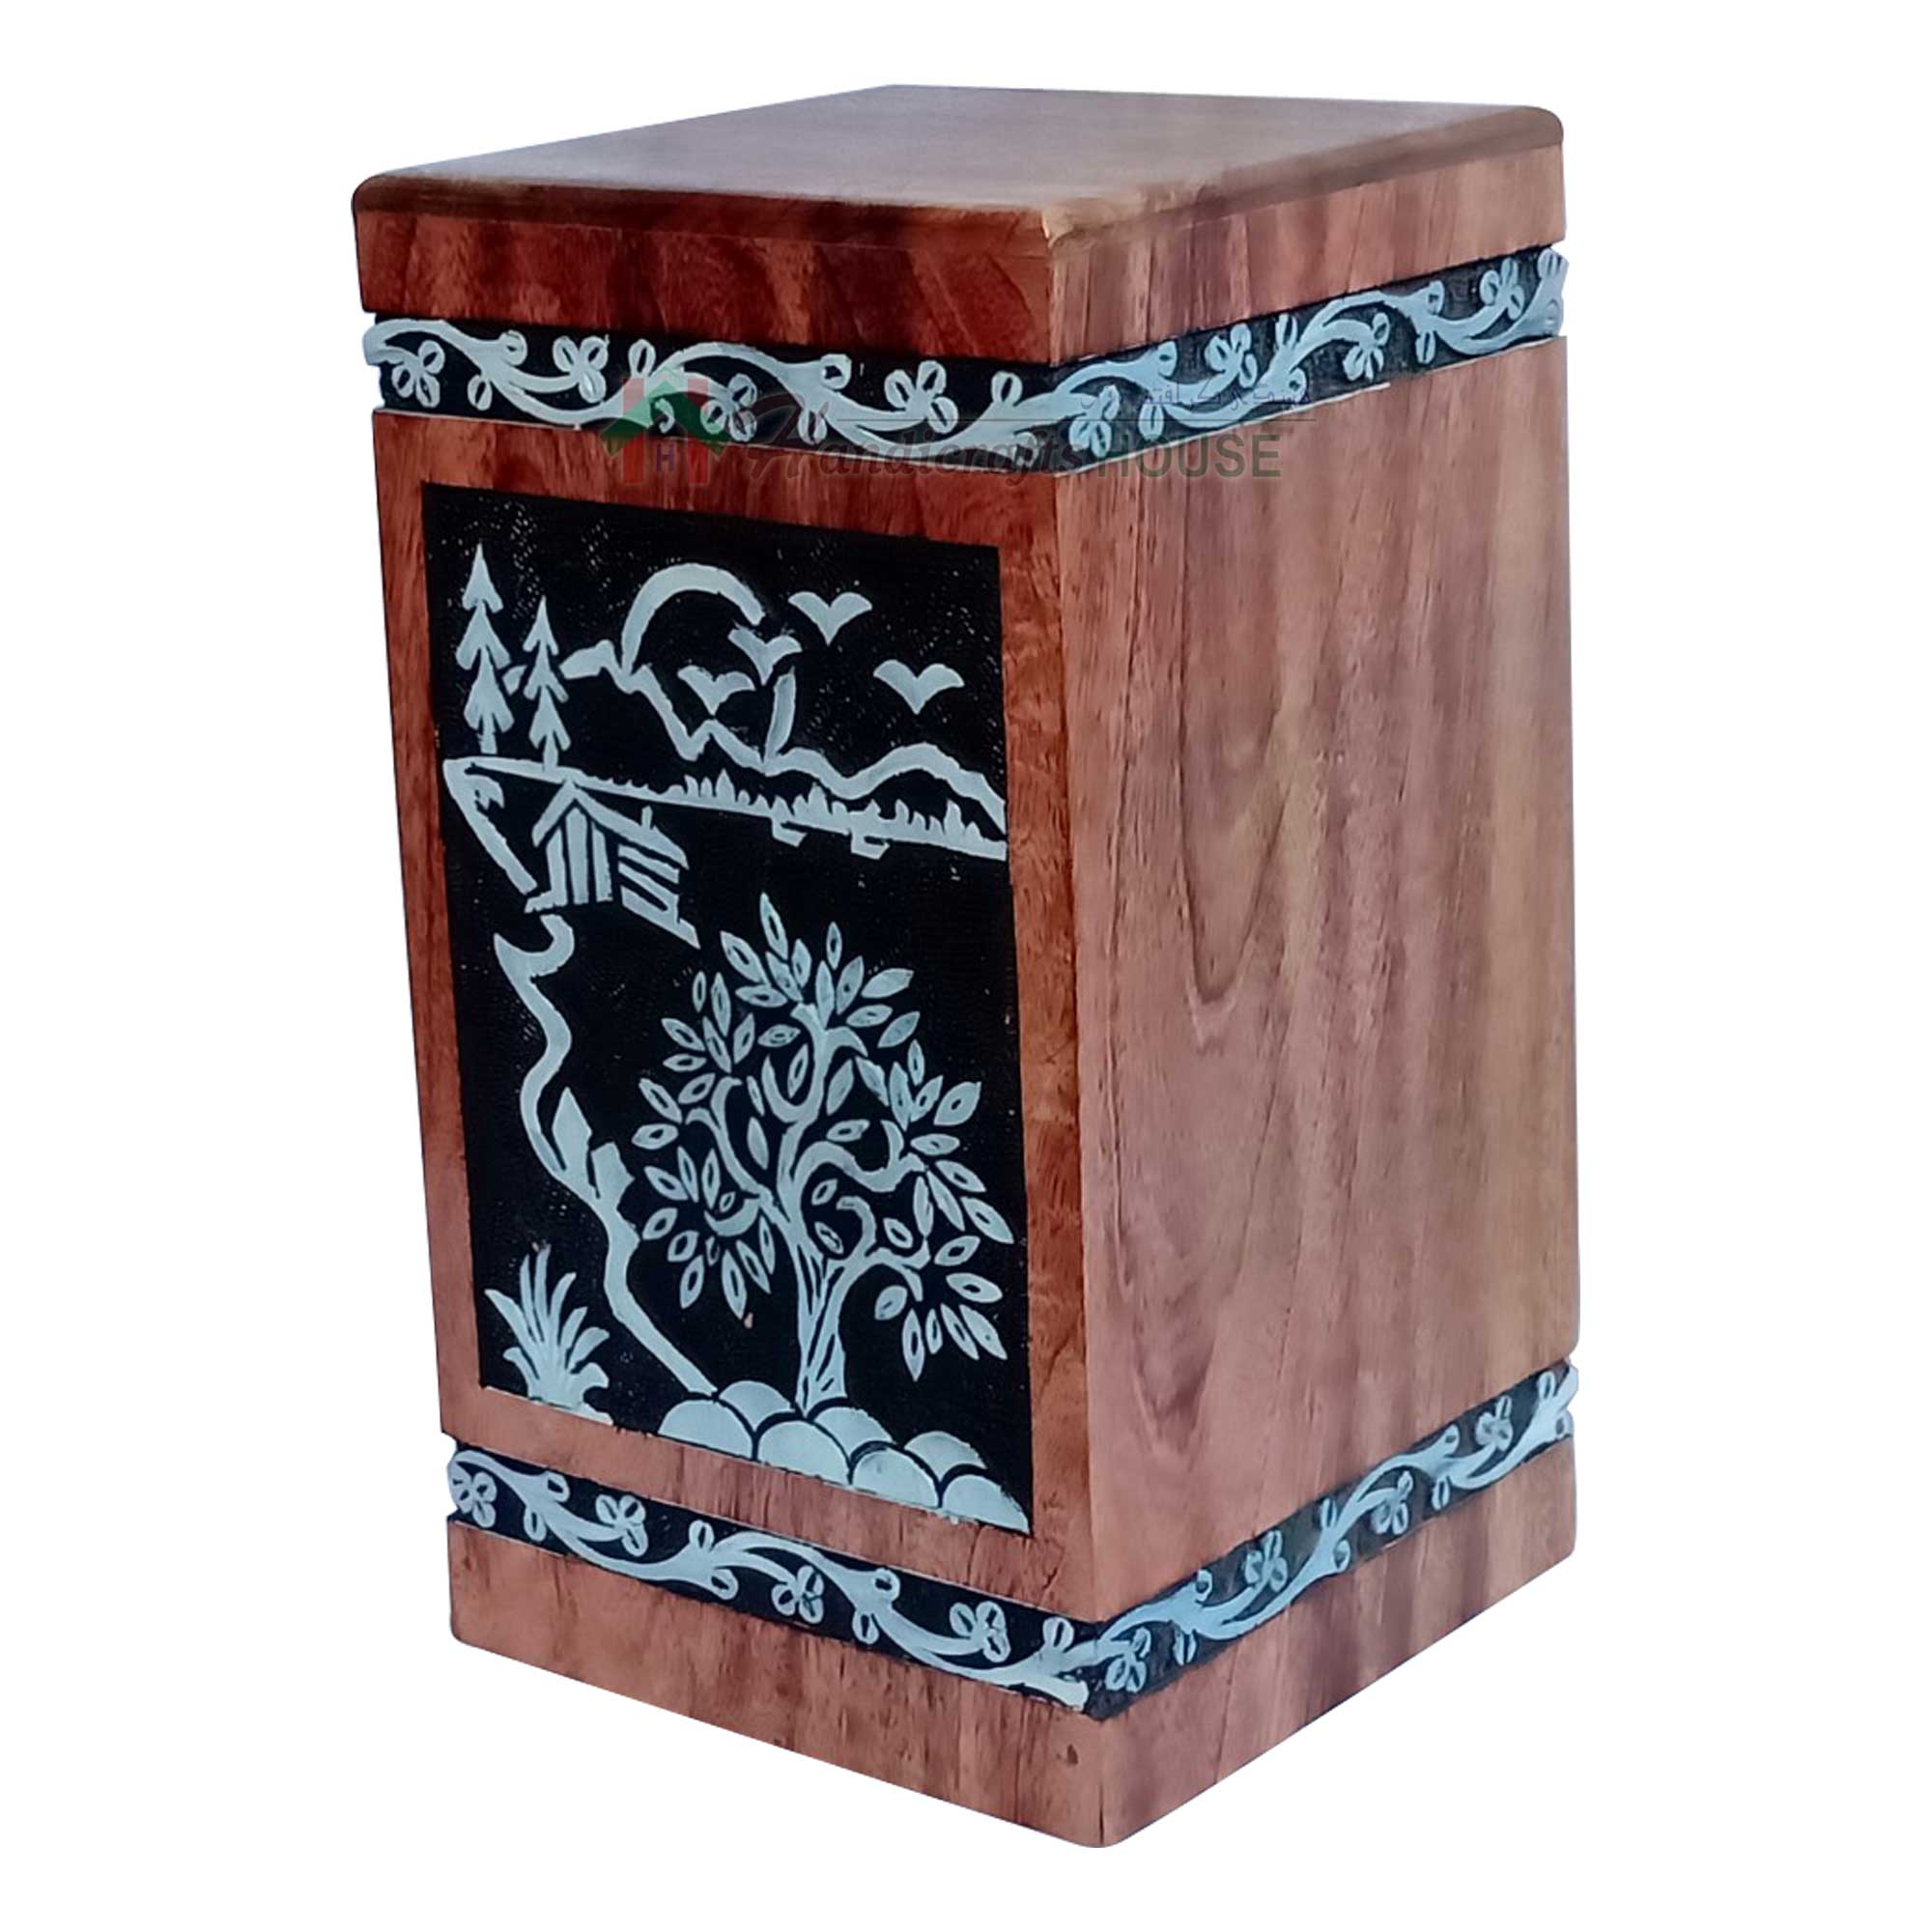 Wood Cremation Keepsake Urn For Sale, Timber Box, Wooden Funeral Adult Urns, Decorative Tower Boxes